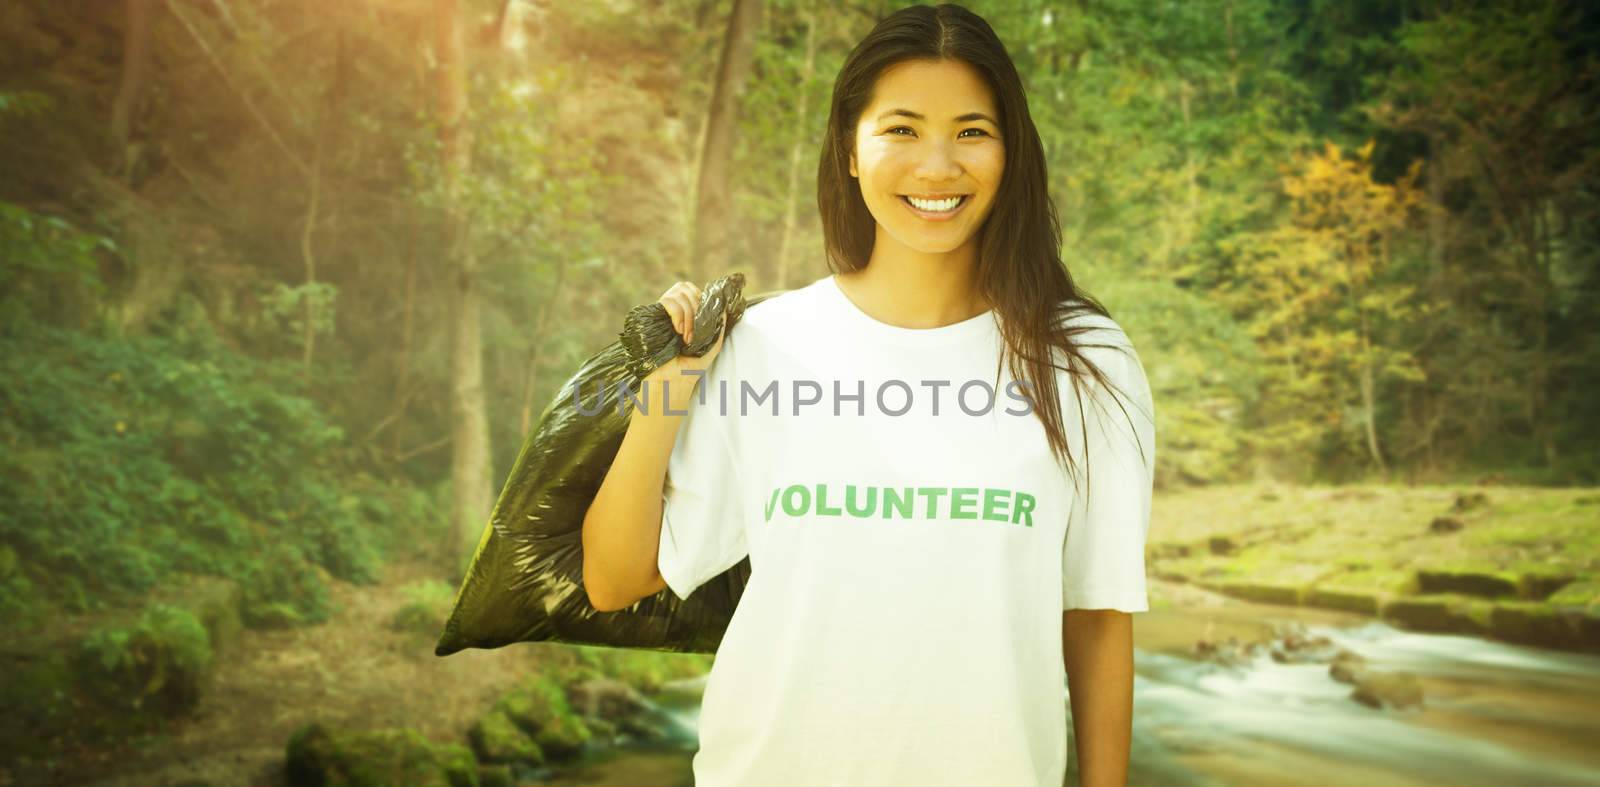 Team of volunteers picking up litter in park against rapids flowing along lush forest